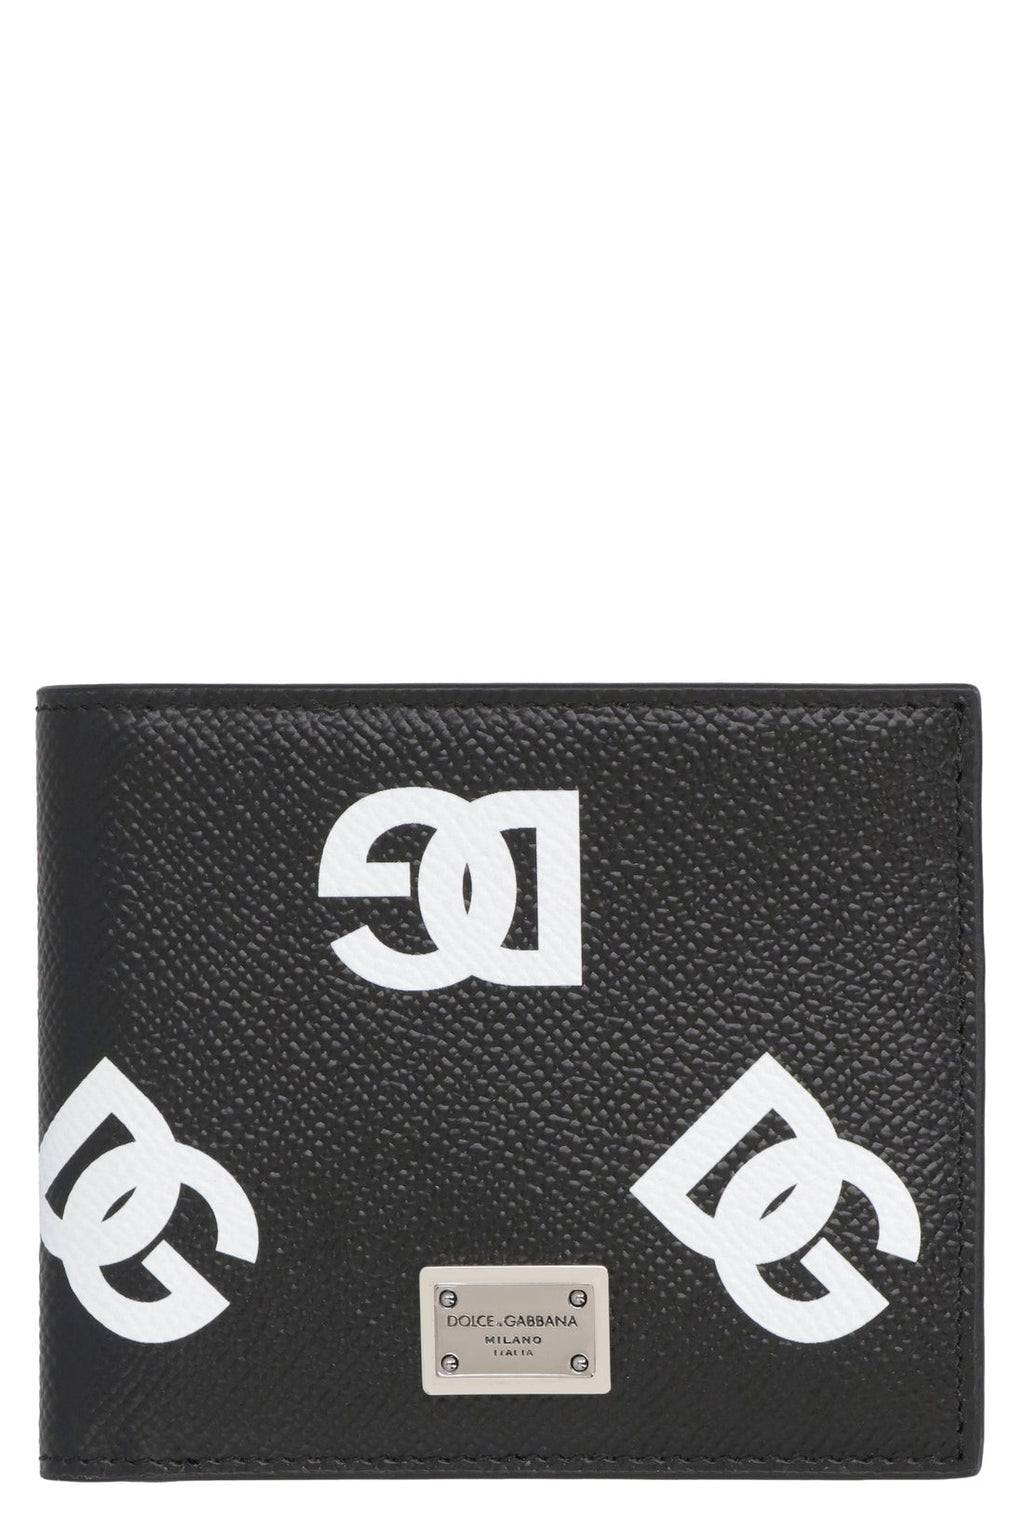 Dolce & Gabbana-OUTLET-SALE-Printed leather wallet-ARCHIVIST